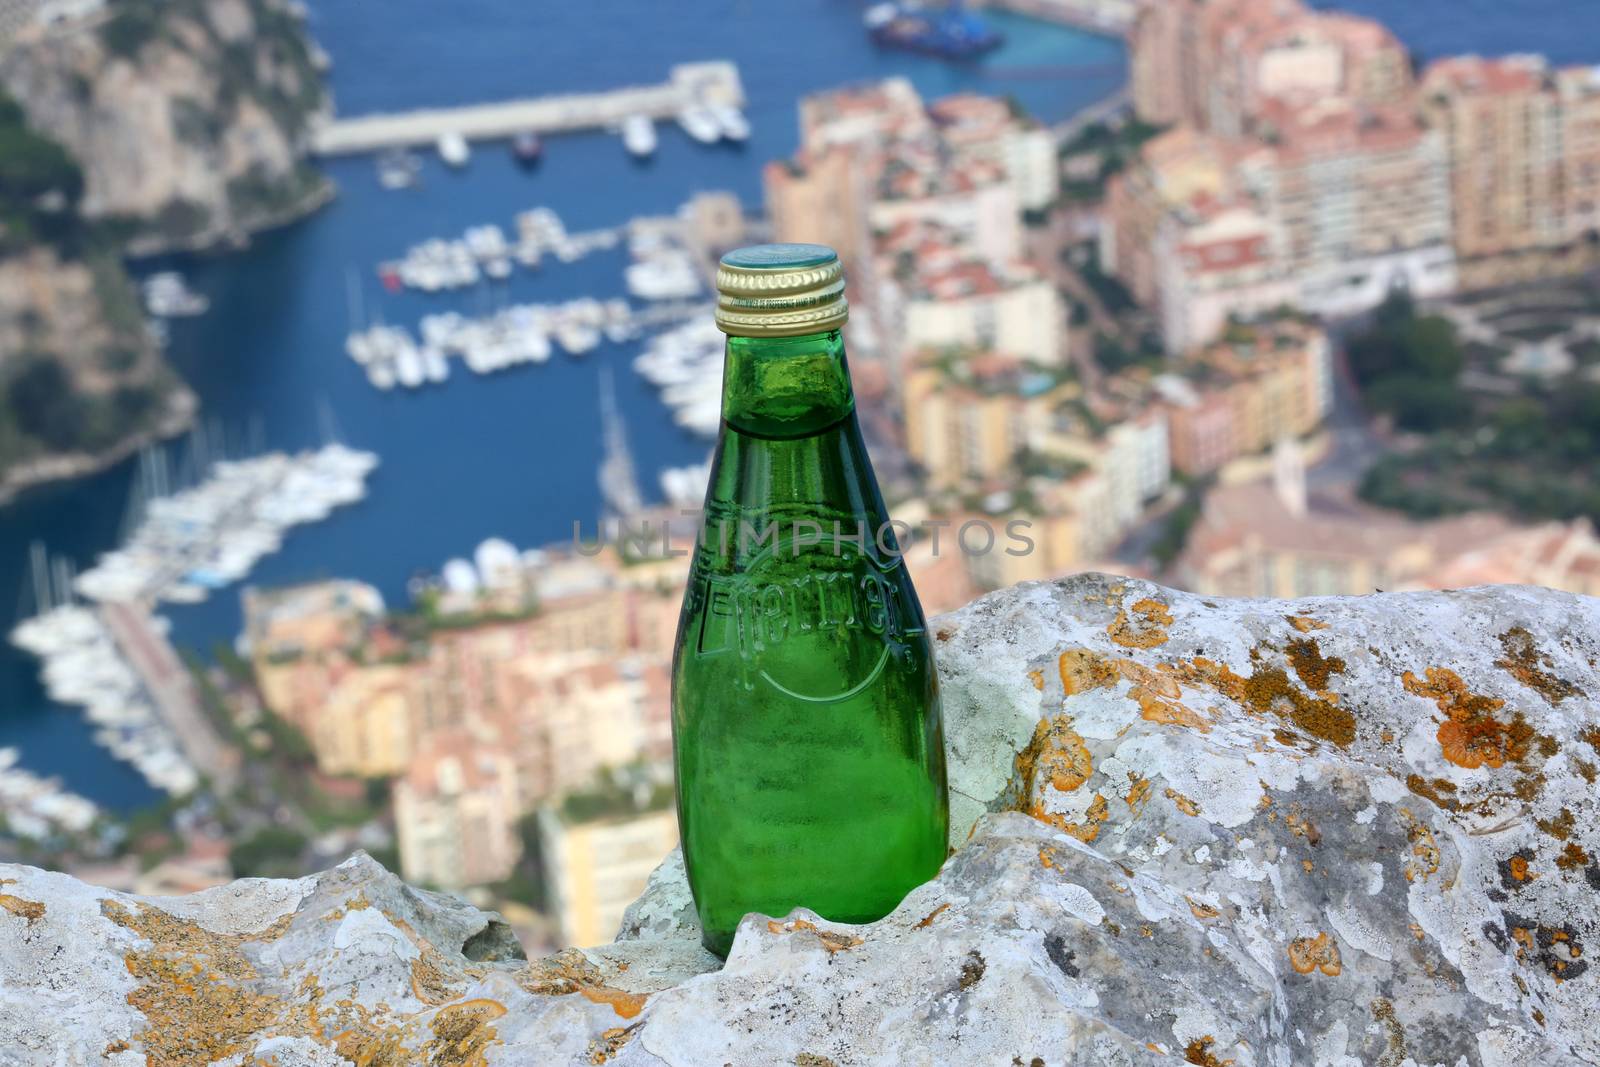 La Turbie, France - June 1, 2016: Perrier Sparkling Natural Mineral Water. Aerial View of the Port of Fontvieille in Monaco in the Background
